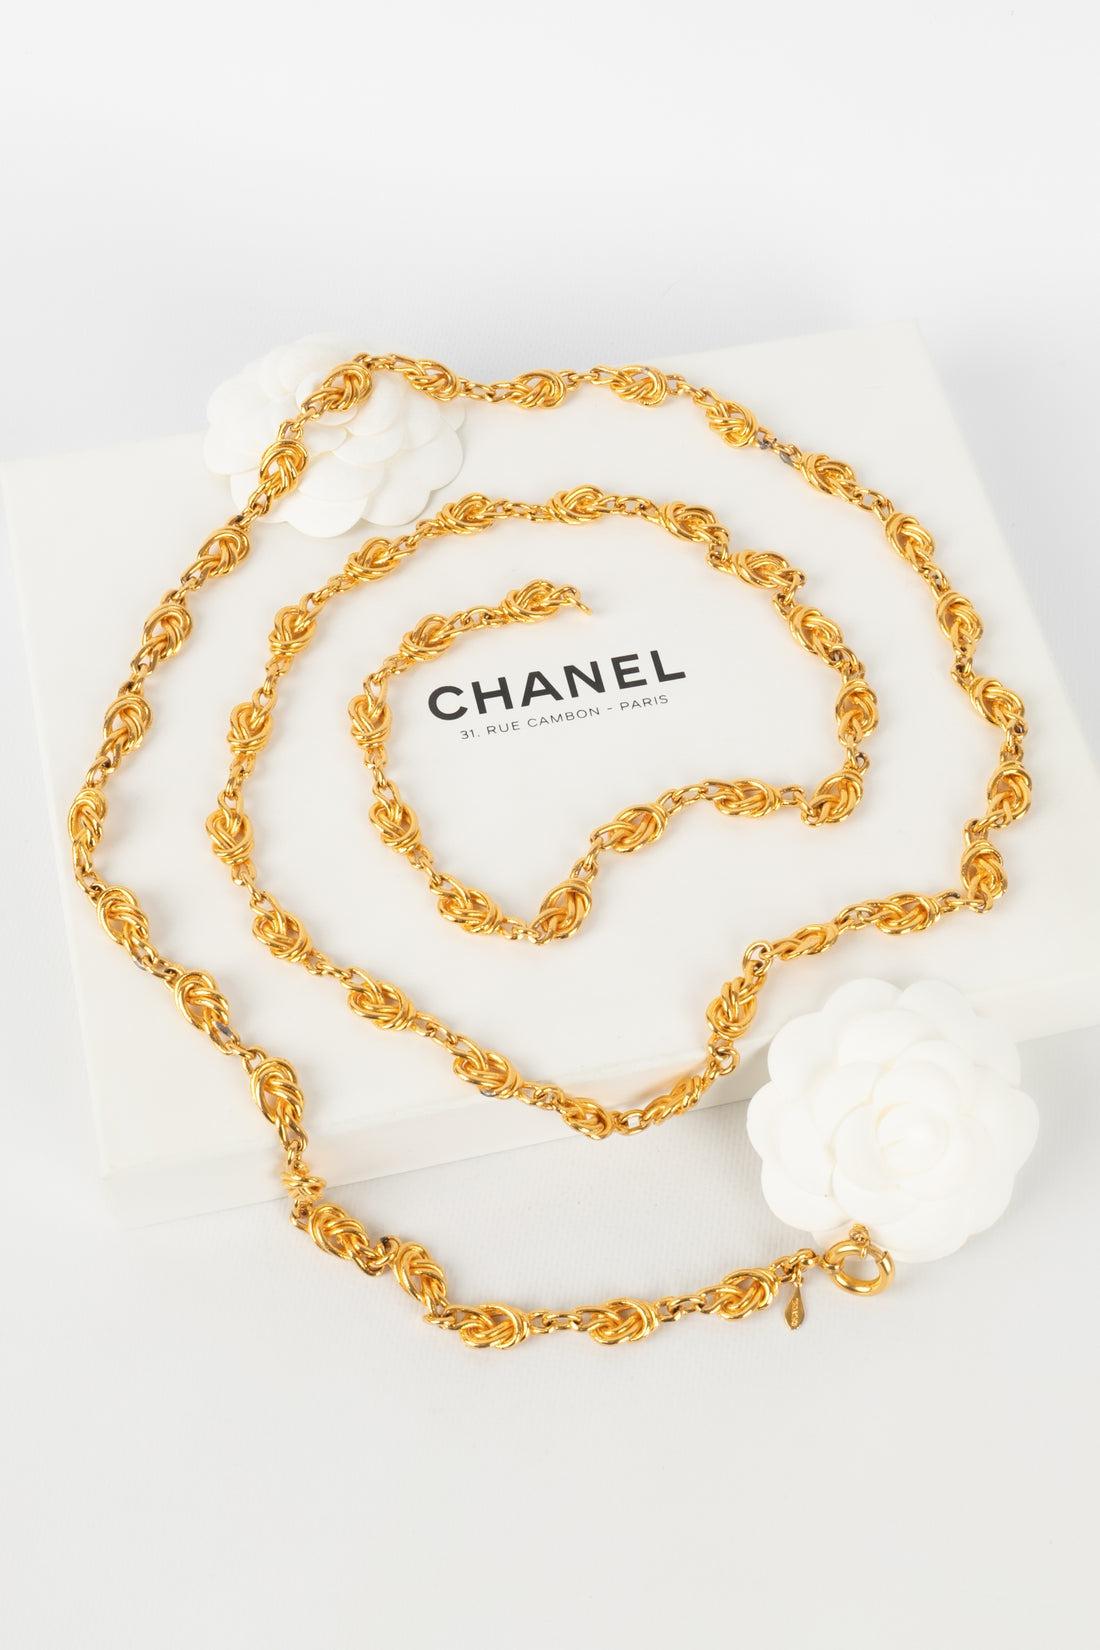 Chanel Golden Metal Necklace Sautoir with Bows For Sale 6